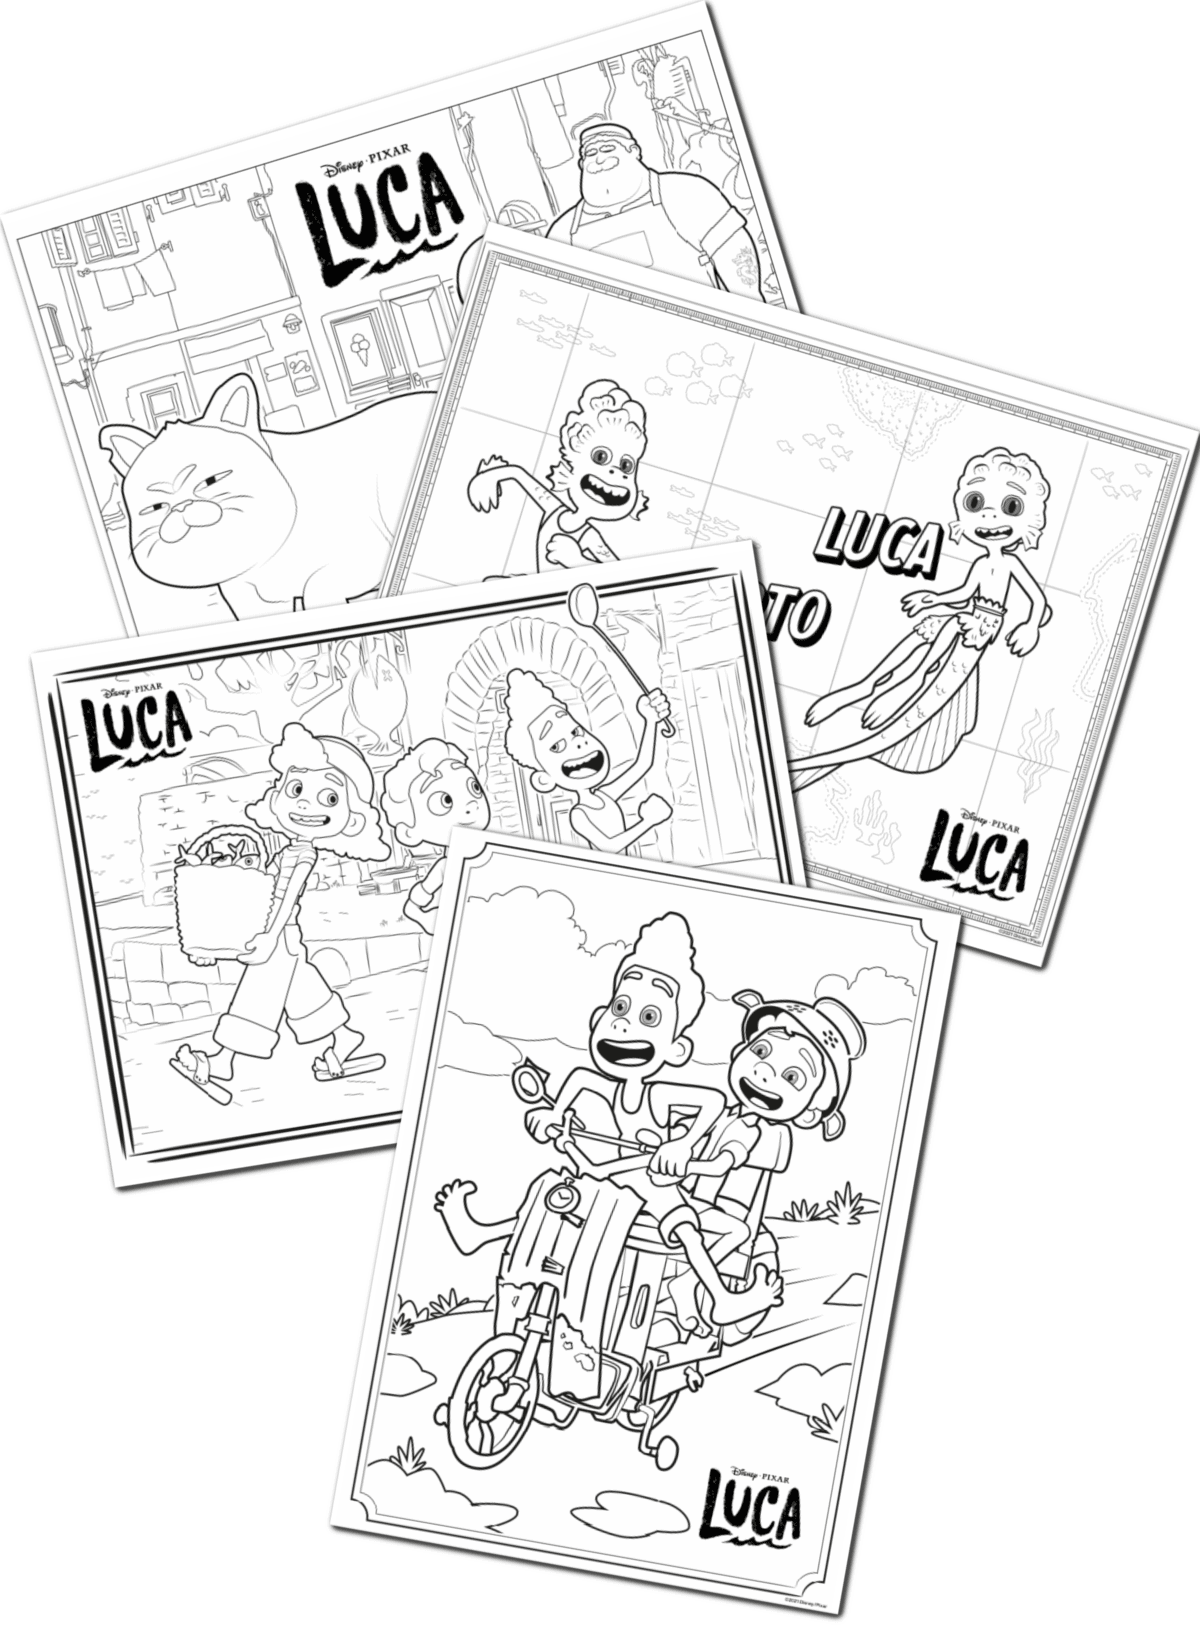 Luca Coloring Pages And Activities | Fun Money Mom